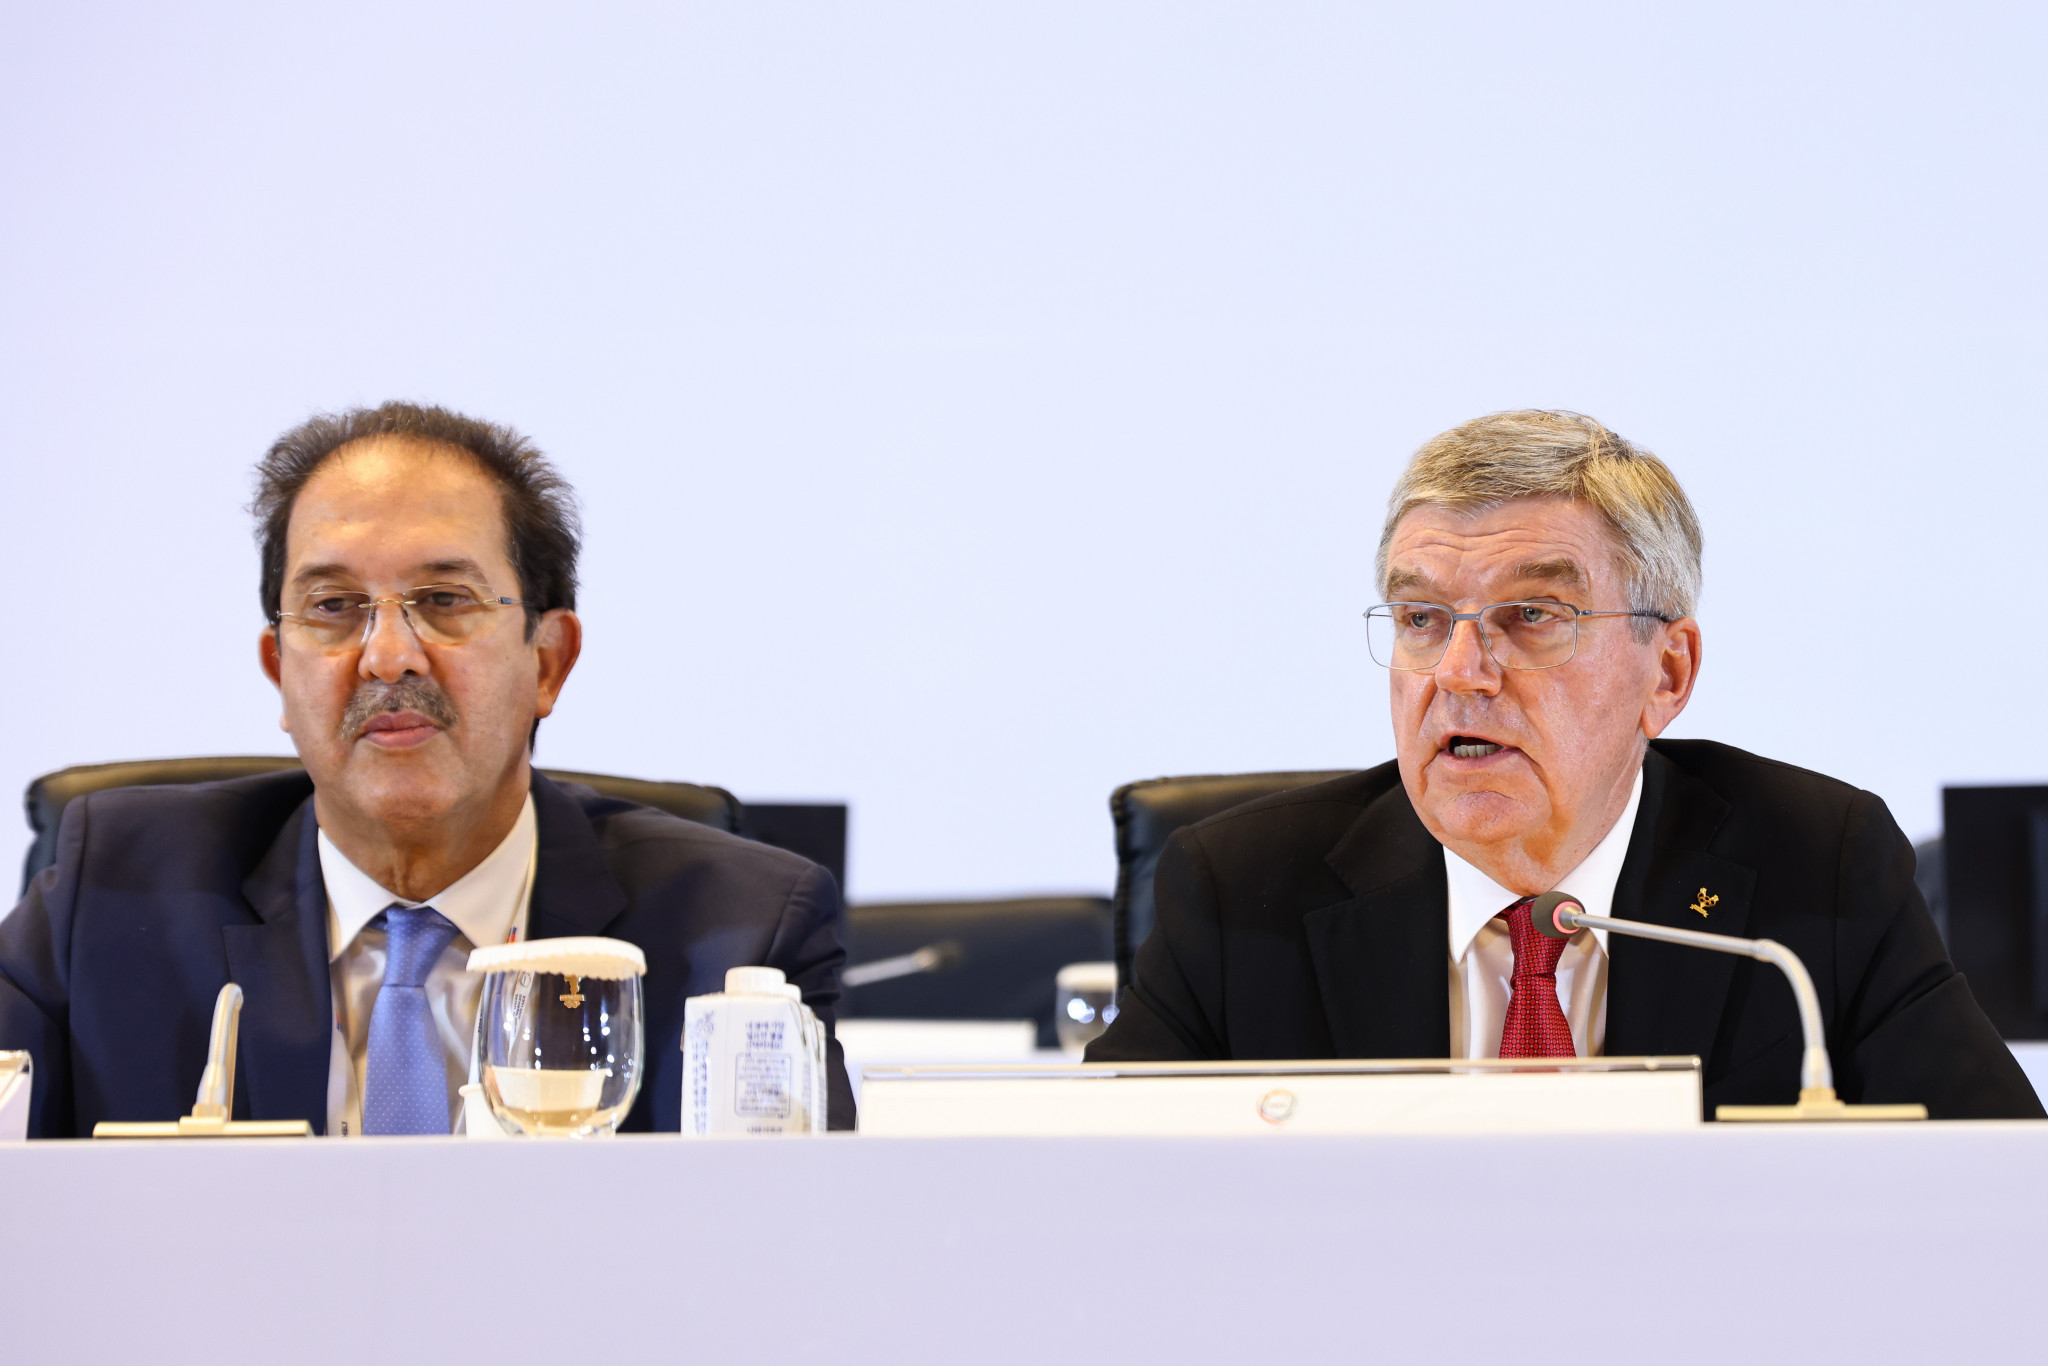 International Olympic Committee President Thomas Bach insisted his organisation is 